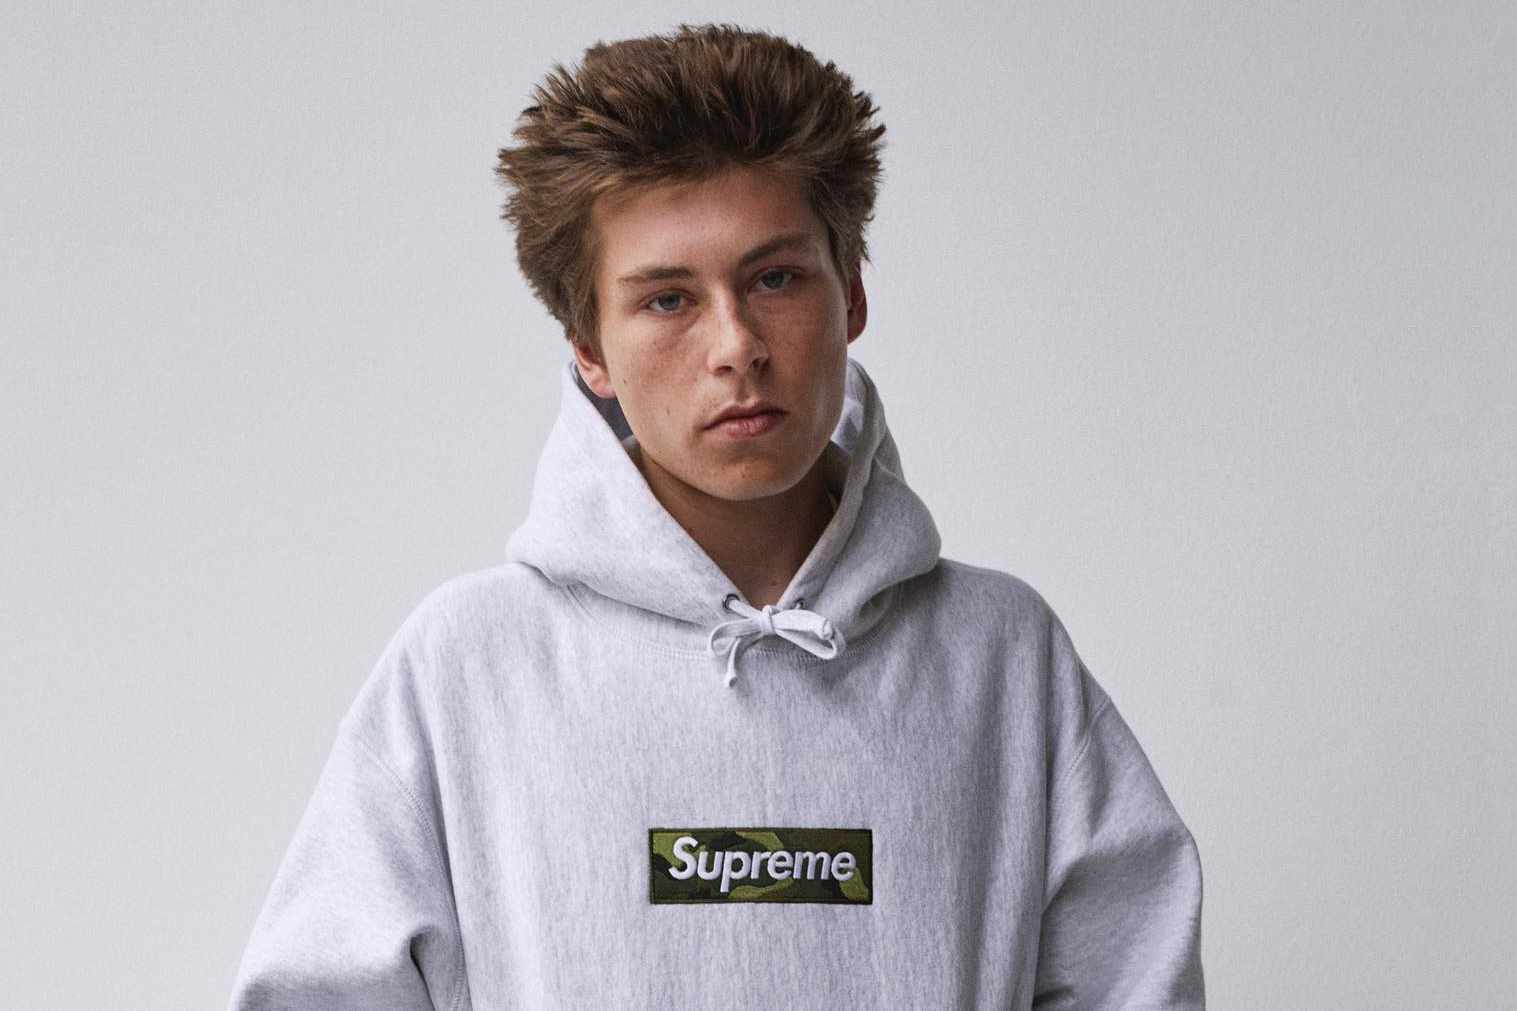 Supreme - Supreme Duck Camo Box Logo Hoodie  HBX - Globally Curated  Fashion and Lifestyle by Hypebeast